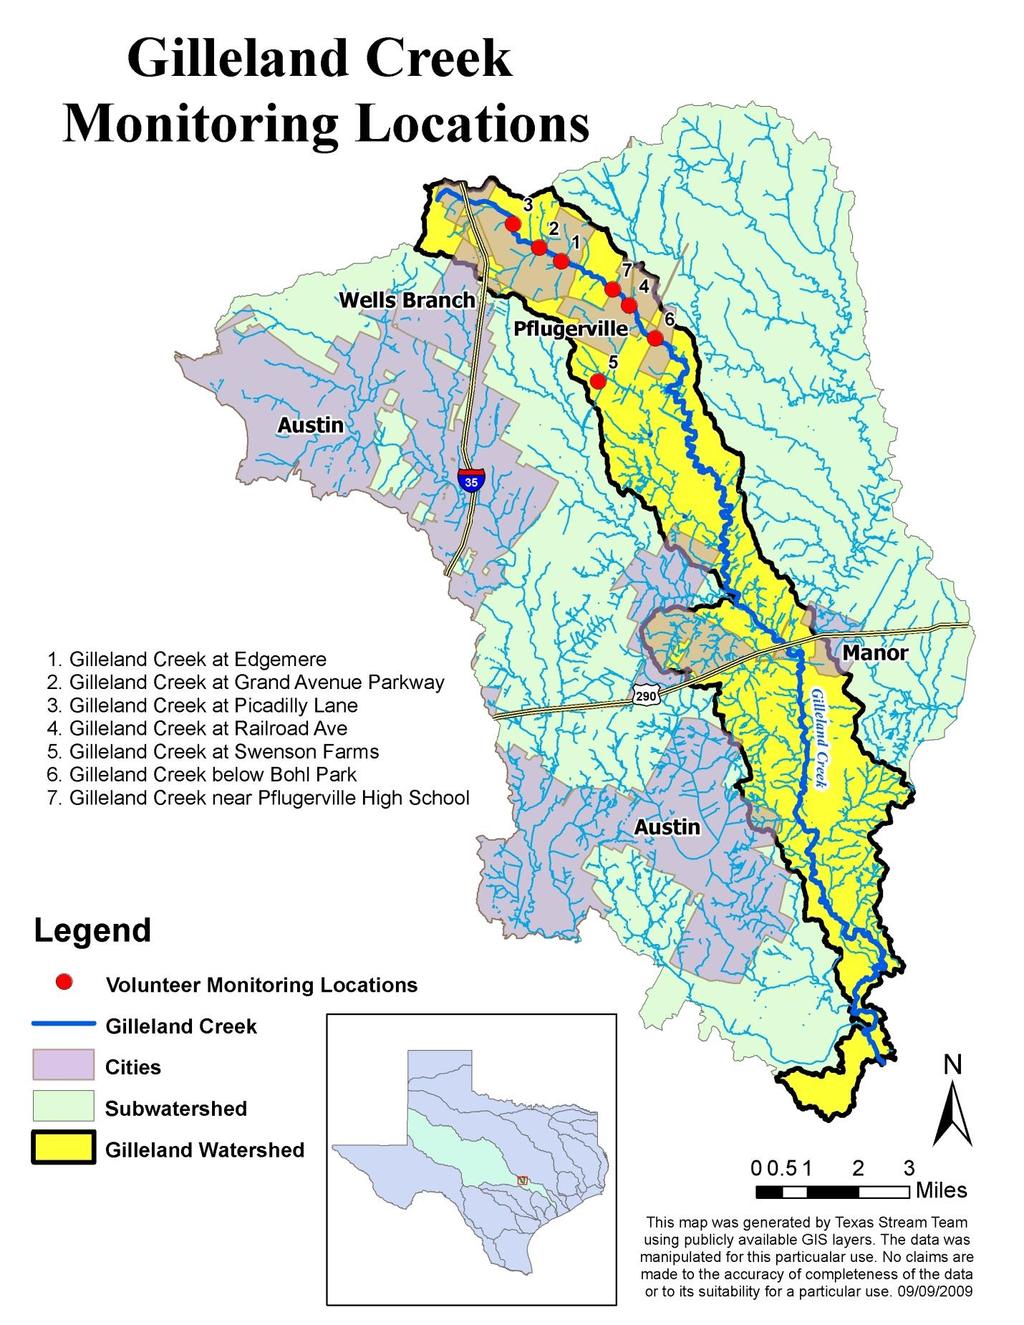 downstream, with the exception of Swenson Farms which is located on a tributary. TCEQ standards are marked in red.